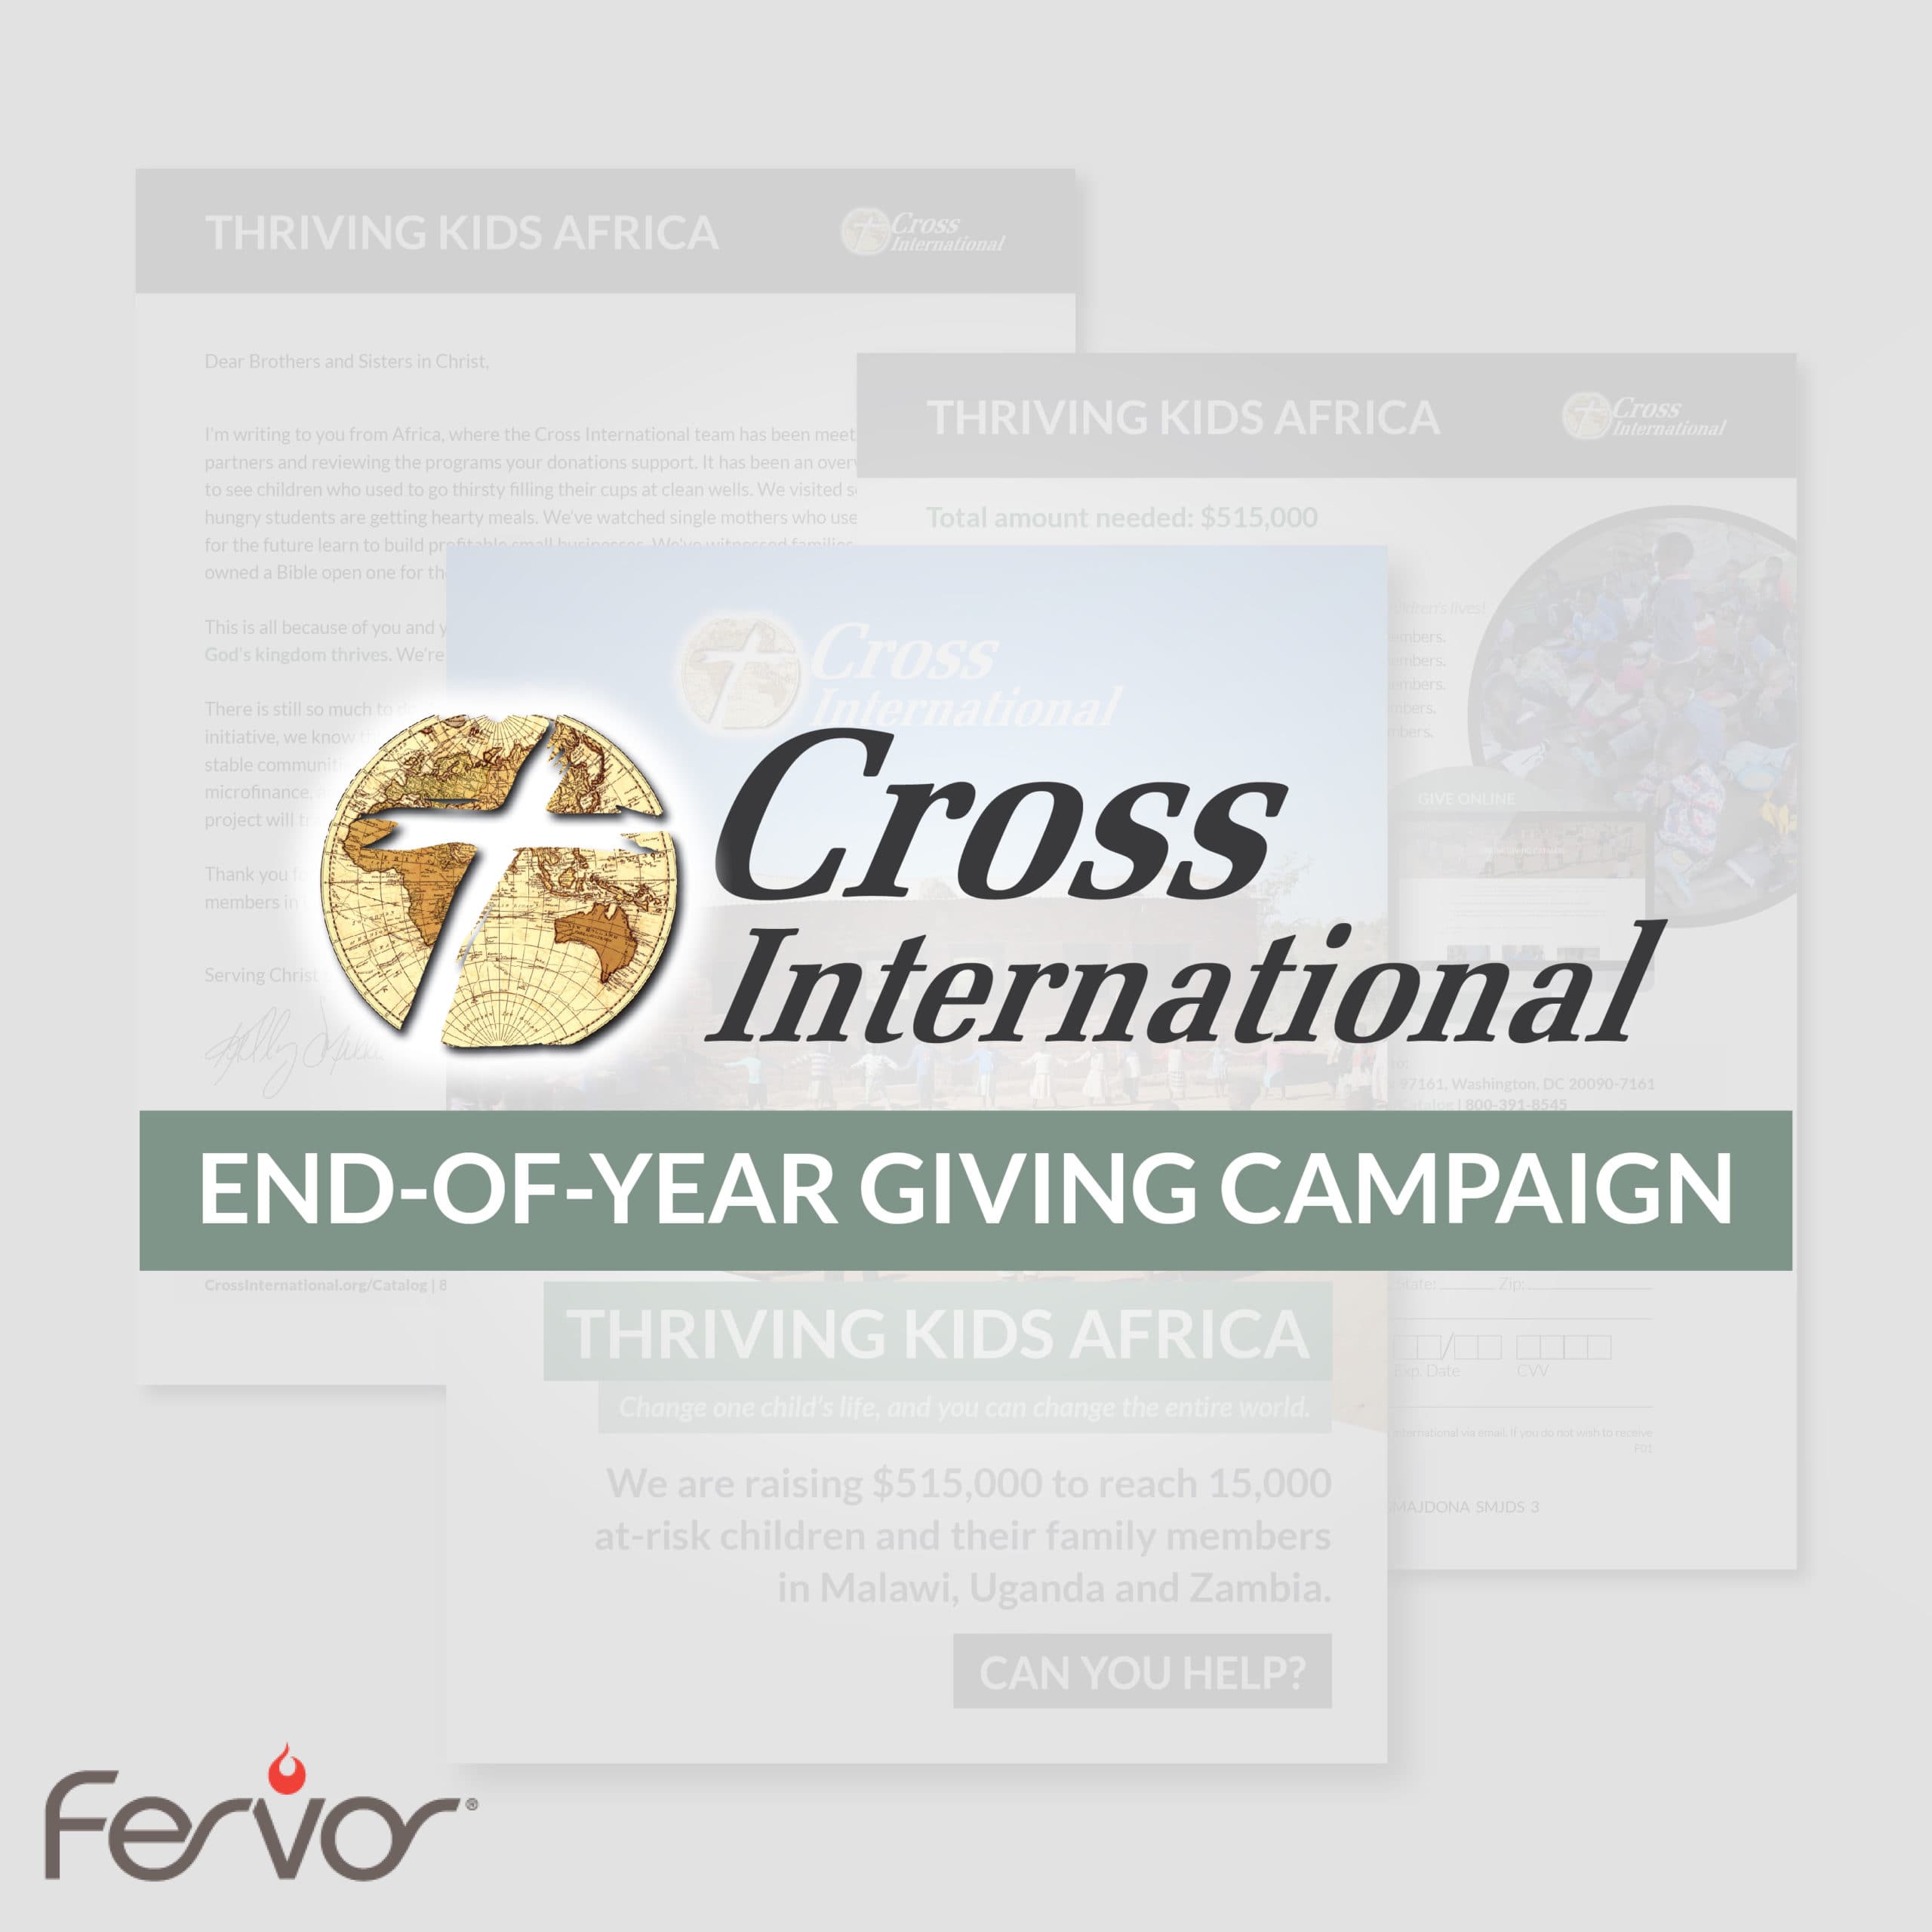 Cross International End-of-year giving campaign: spotlight image 1